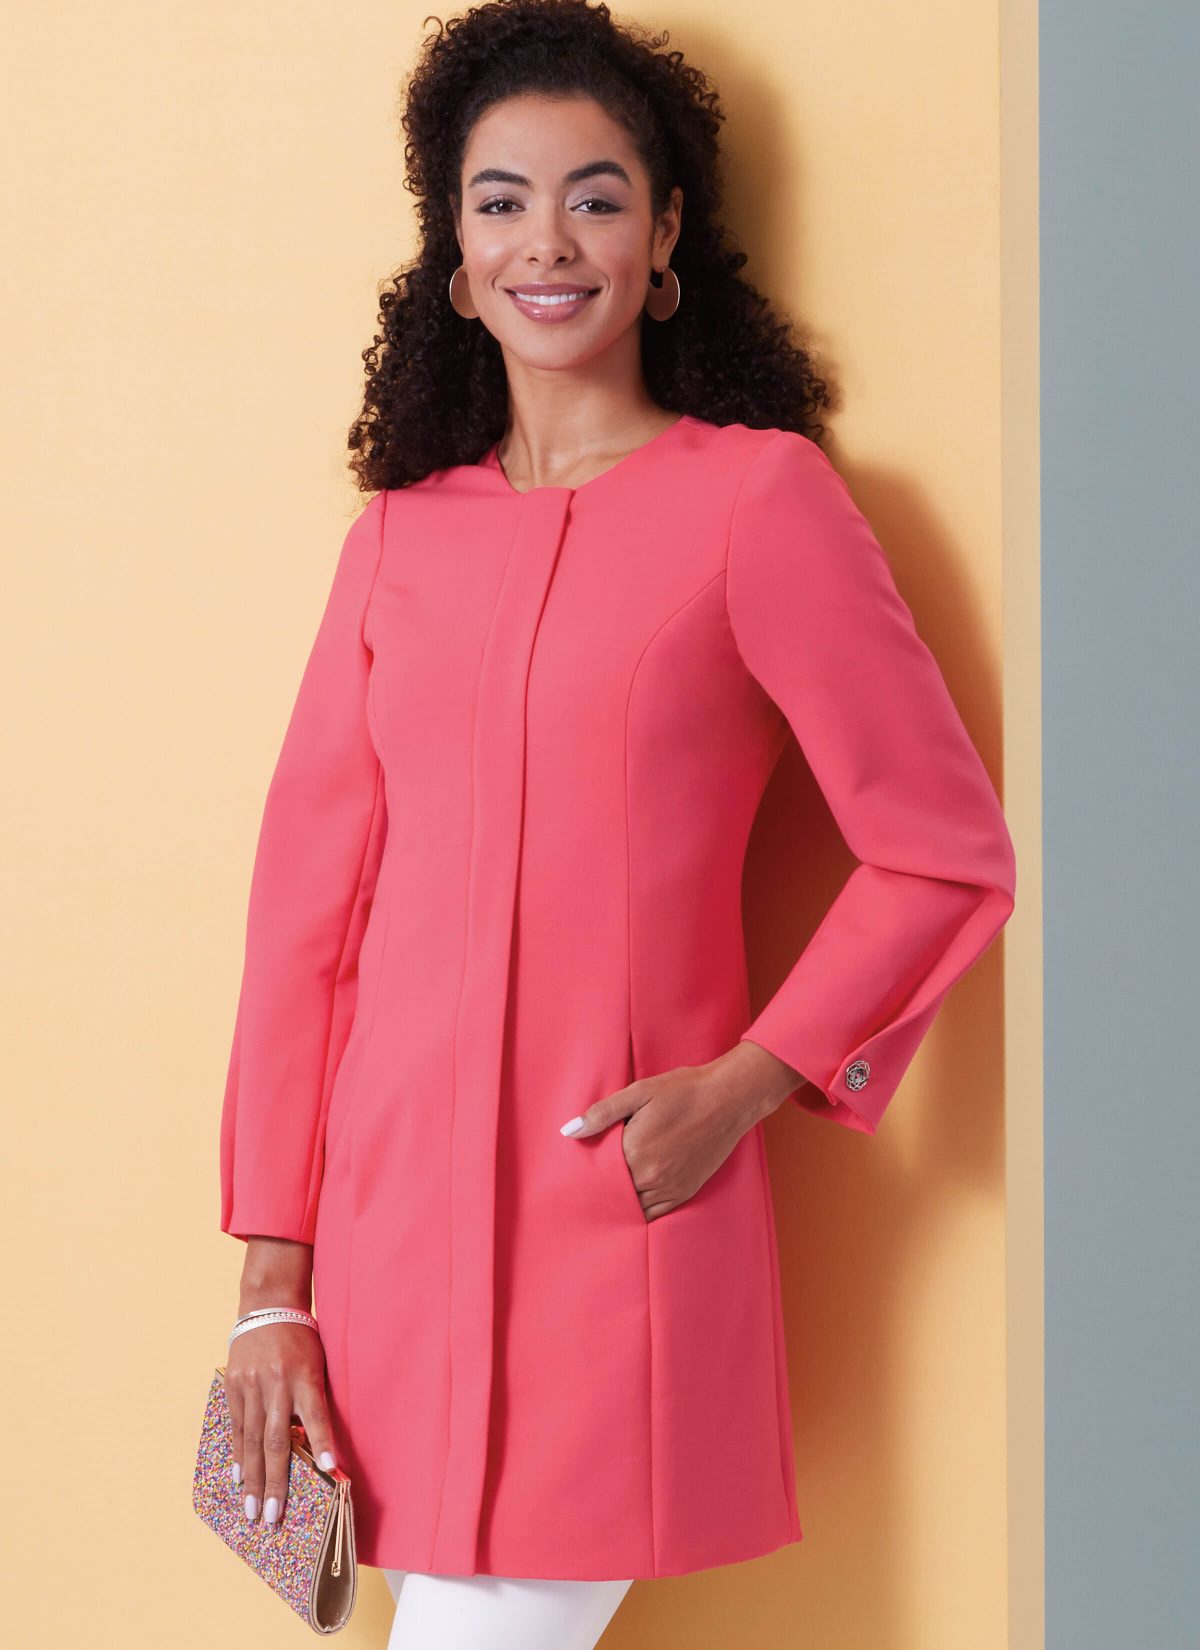 Butterick Sewing Pattern B6979 Misses’ Jacket